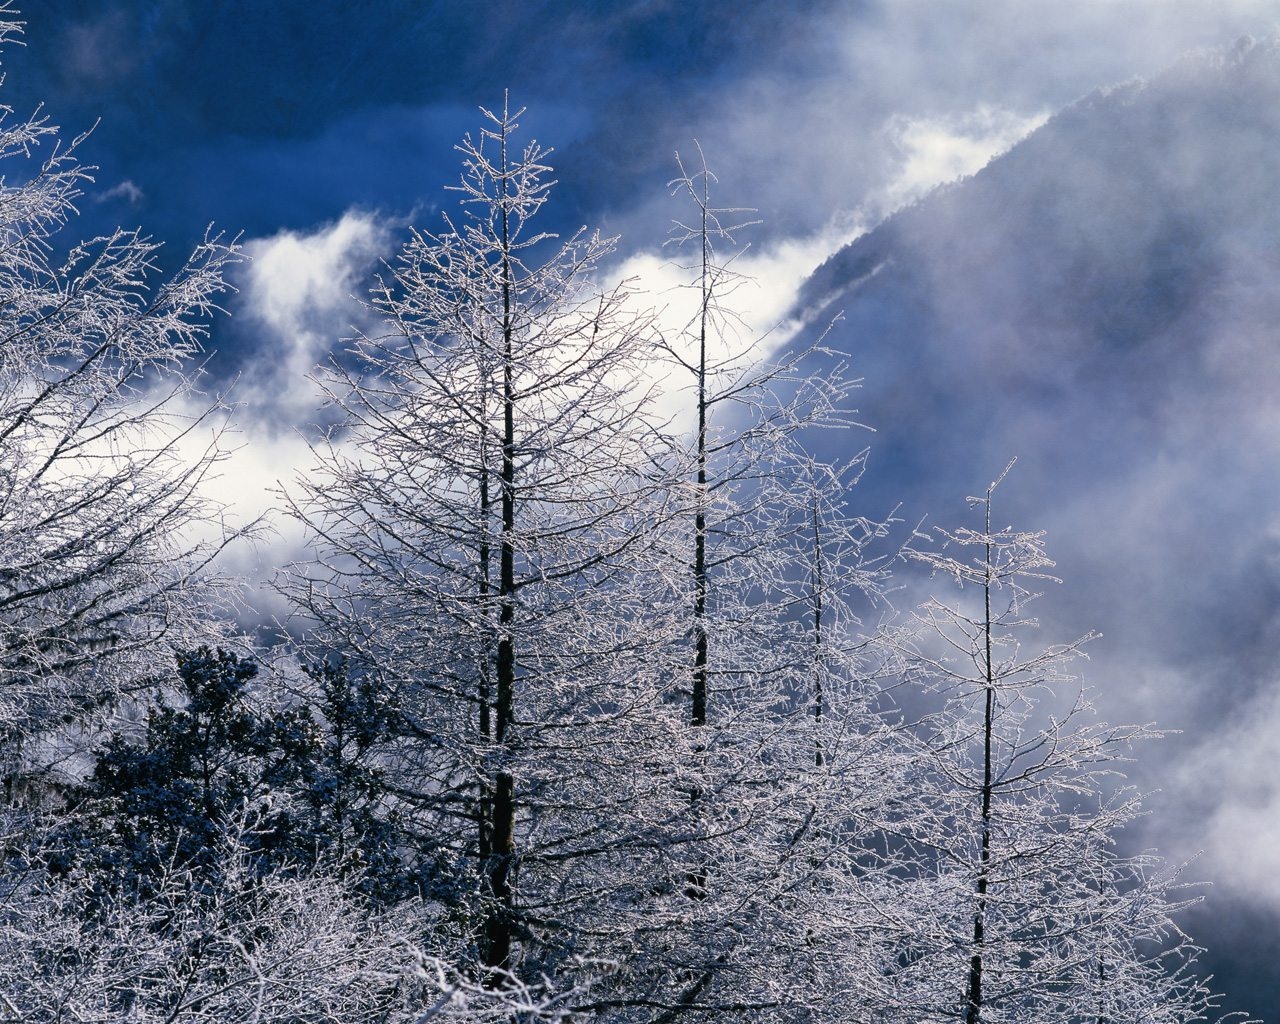 Beautiful Winter Landscapes Wallpaper in jpg format for free download